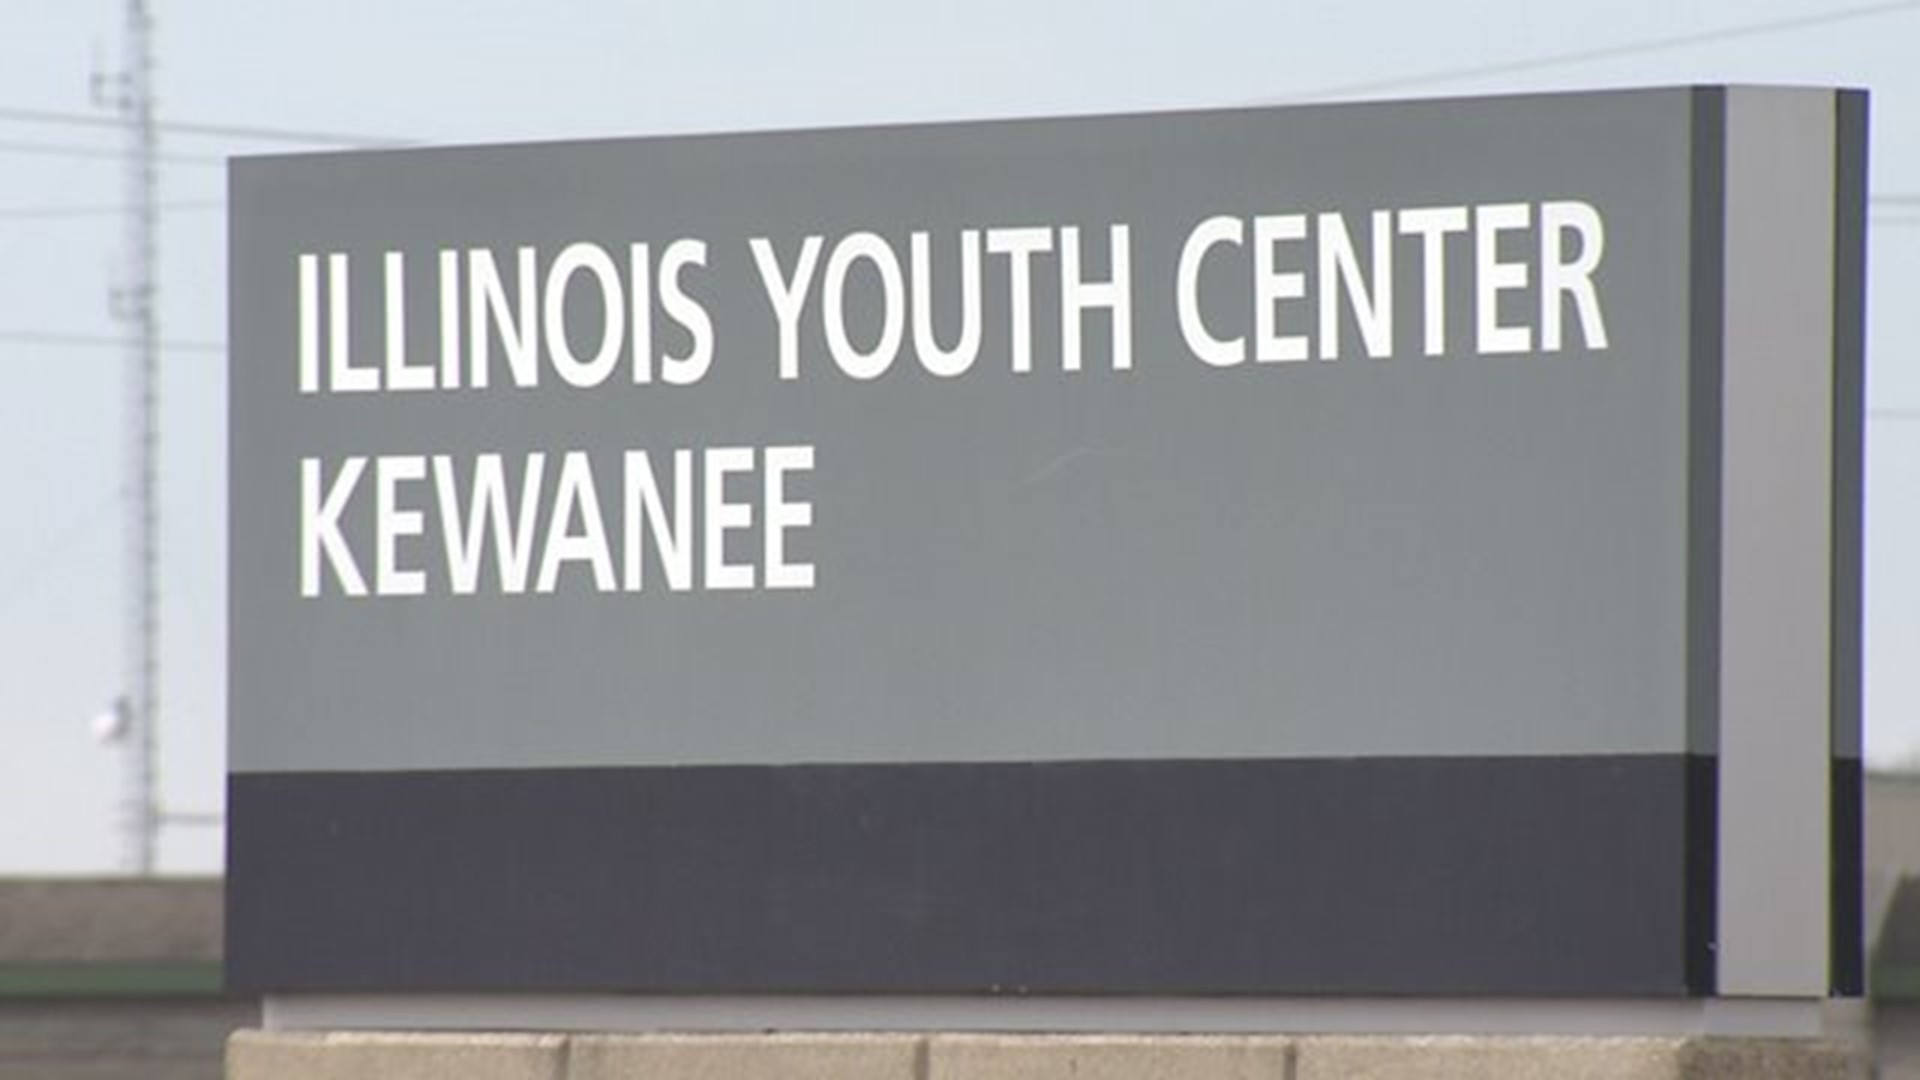 Kewanee worried over job losses as Illinois Youth Center closes